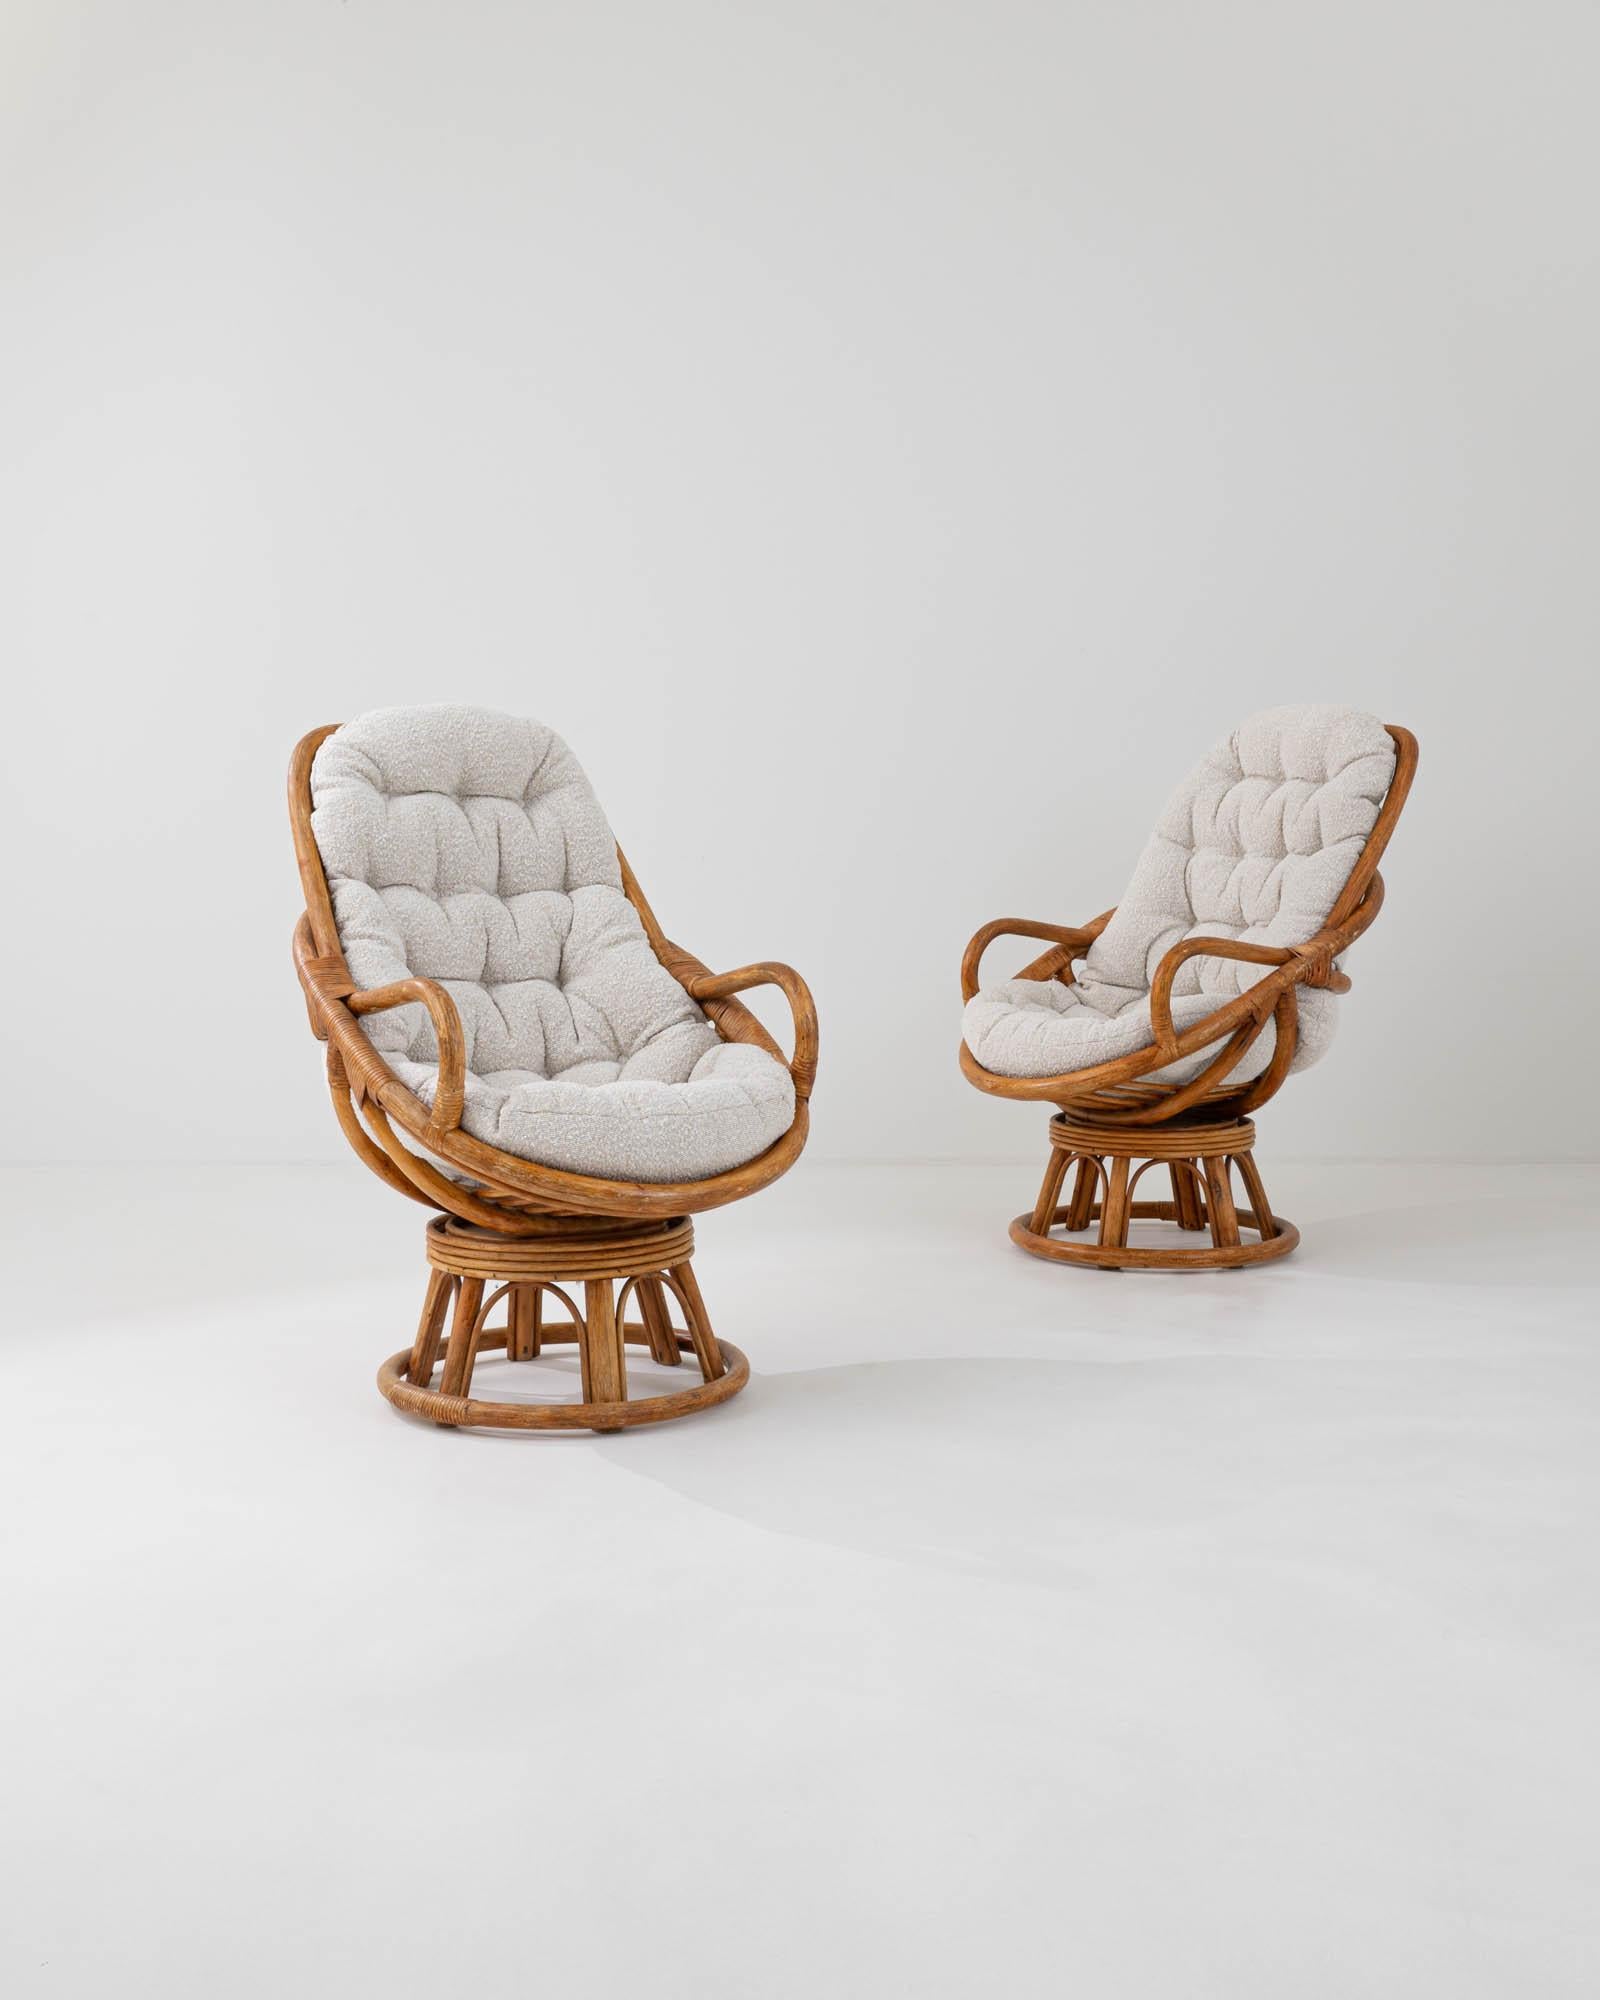 This pair of cozy swivel armchairs, originating from 20th-century France, seamlessly integrates a swiveling mechanism into the rattan base for smooth rotation. The upper portion features an appealing design with smoothly rounded armrests and tufted